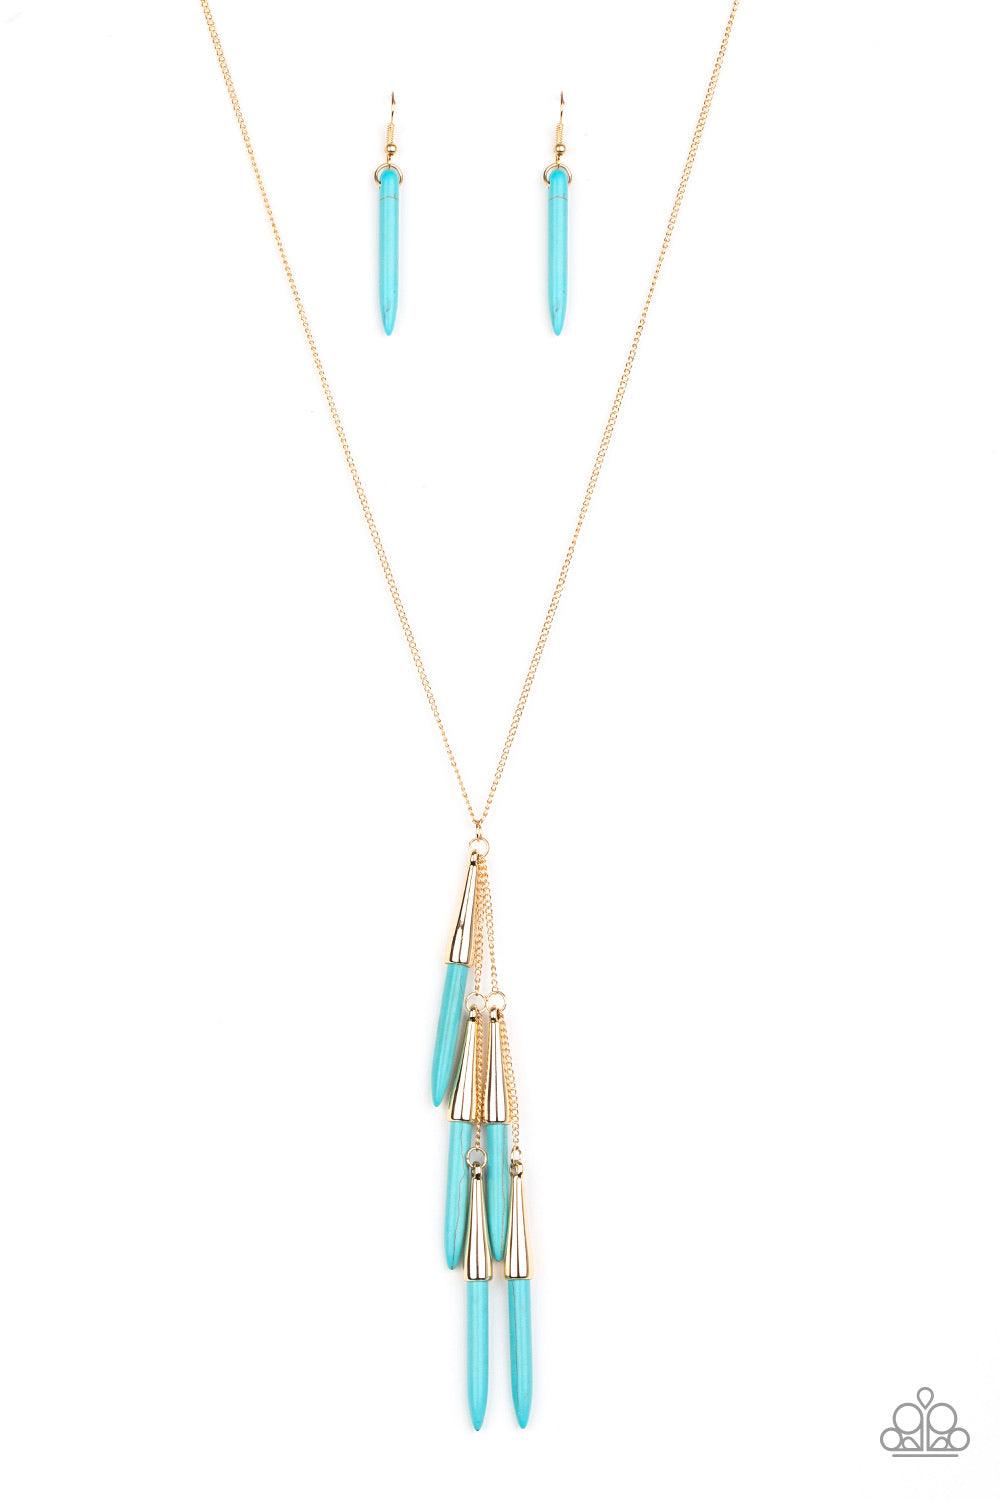 Paparazzi Accessories PRIMITIVE And Proper - Blue Capped in glistening gold fittings, refreshing turquoise stone tusk-like bars haphazardly dangle from two dainty gold chains, creating an earthy fringe at the bottom of a lengthened gold chain. Features an